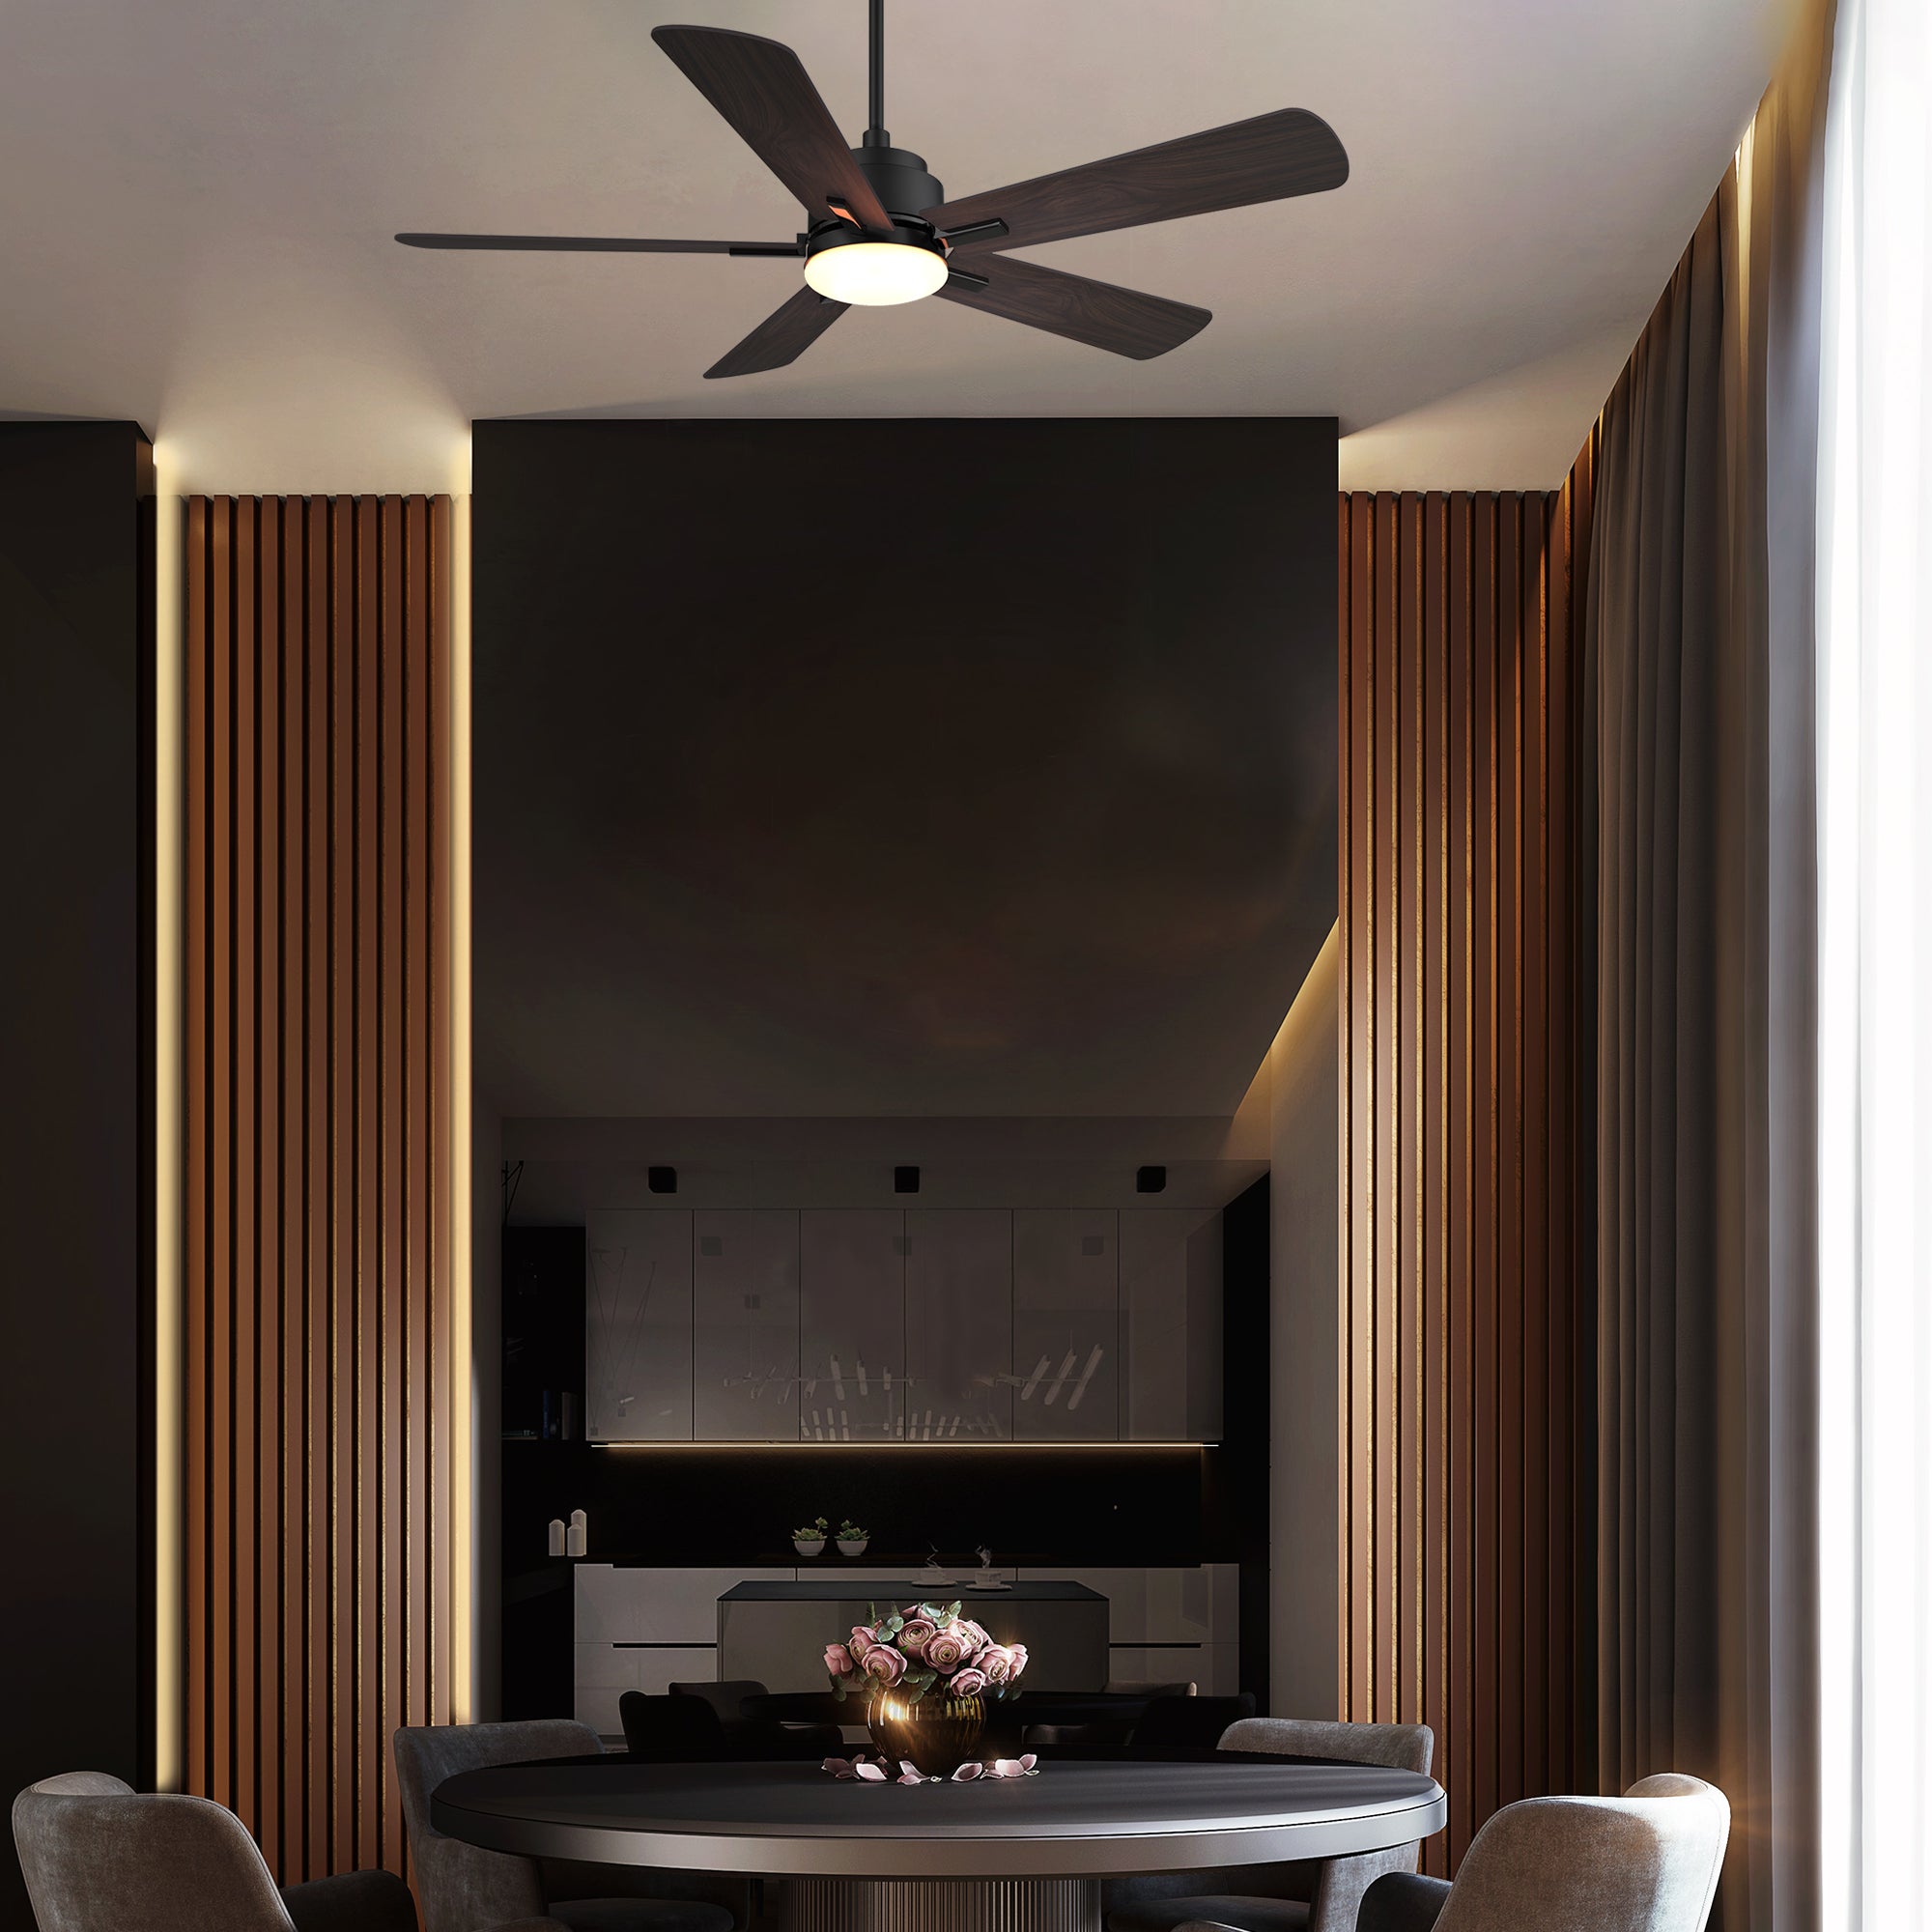 This Elgin 52'' smart ceiling fan keeps your space cool, bright, and stylish. It is a soft modern masterpiece perfect for your large indoor living spaces. This Wifi smart ceiling fan is a simplicity designing with Black finish, use elegant Plywood blades and has an integrated 4000K LED cool light. The fan features Remote control, Wi-Fi apps, Siri Shortcut and Voice control technology (compatible with Amazon Alexa and Google Home Assistant ) to set fan preferences. #color_wood